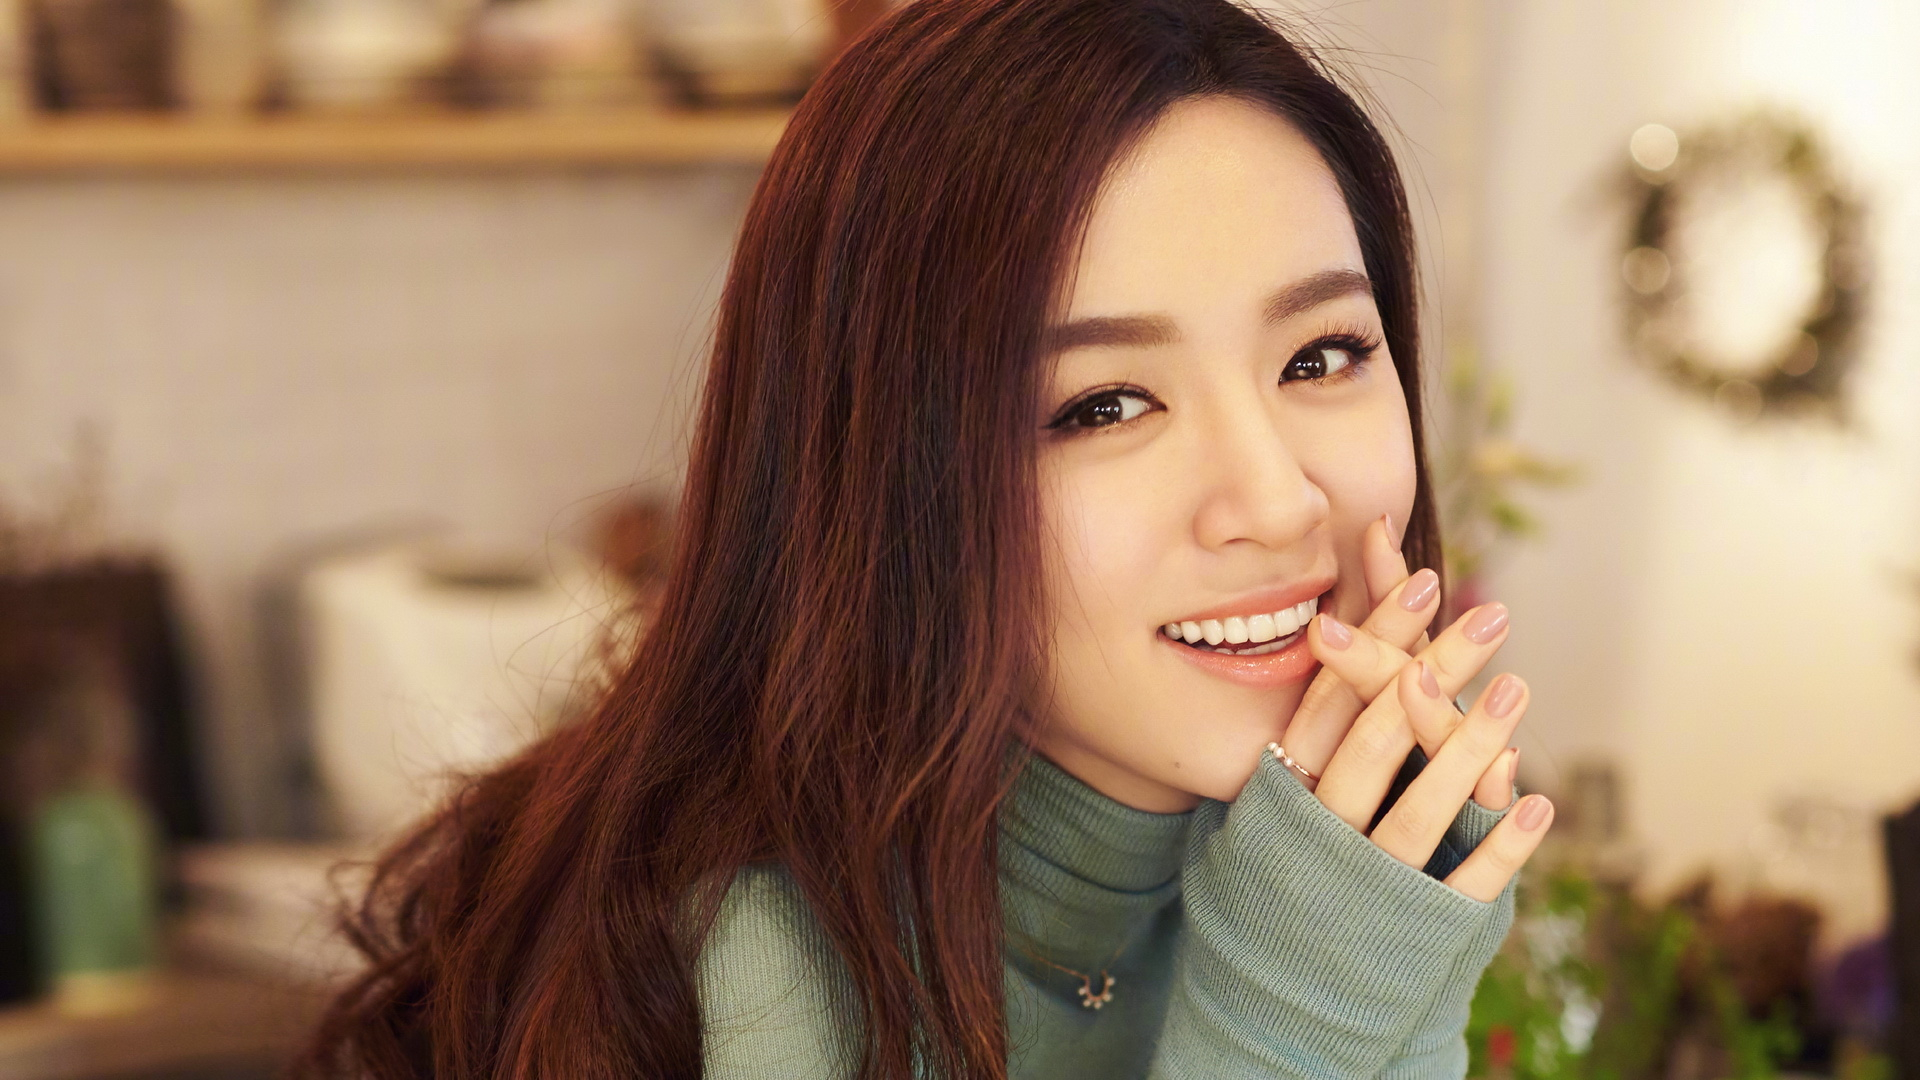 Women Smile Asian Depth Of Field Pullover Rings Necklace Painted Nails Long Hair Brunette Shelves 1920x1080